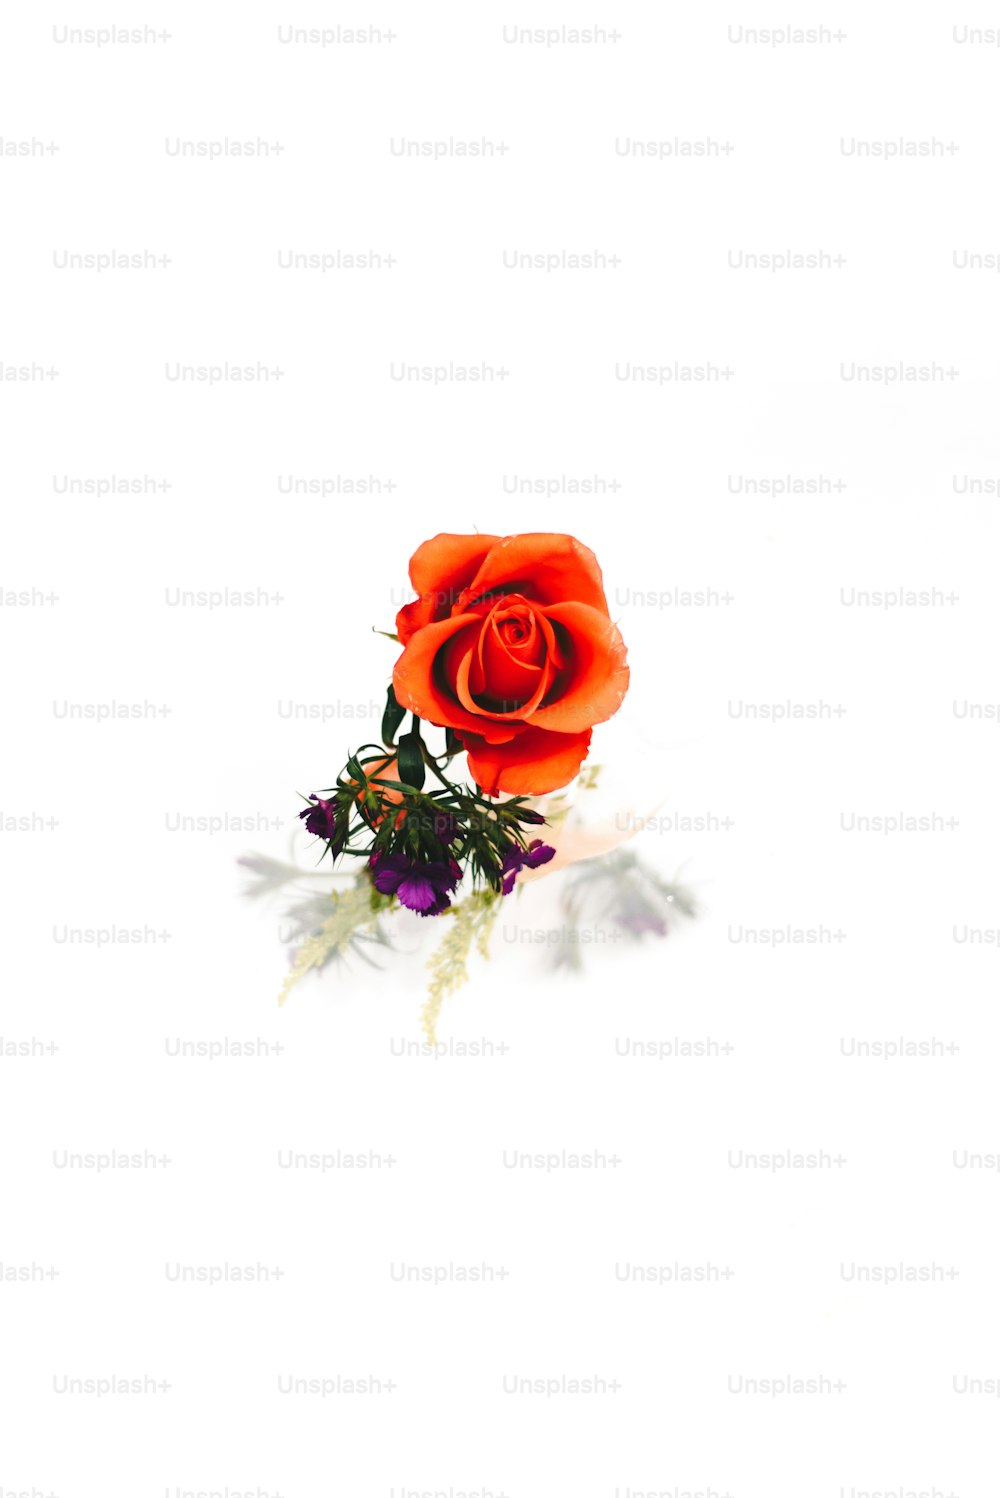 a single red rose is shown on a white background